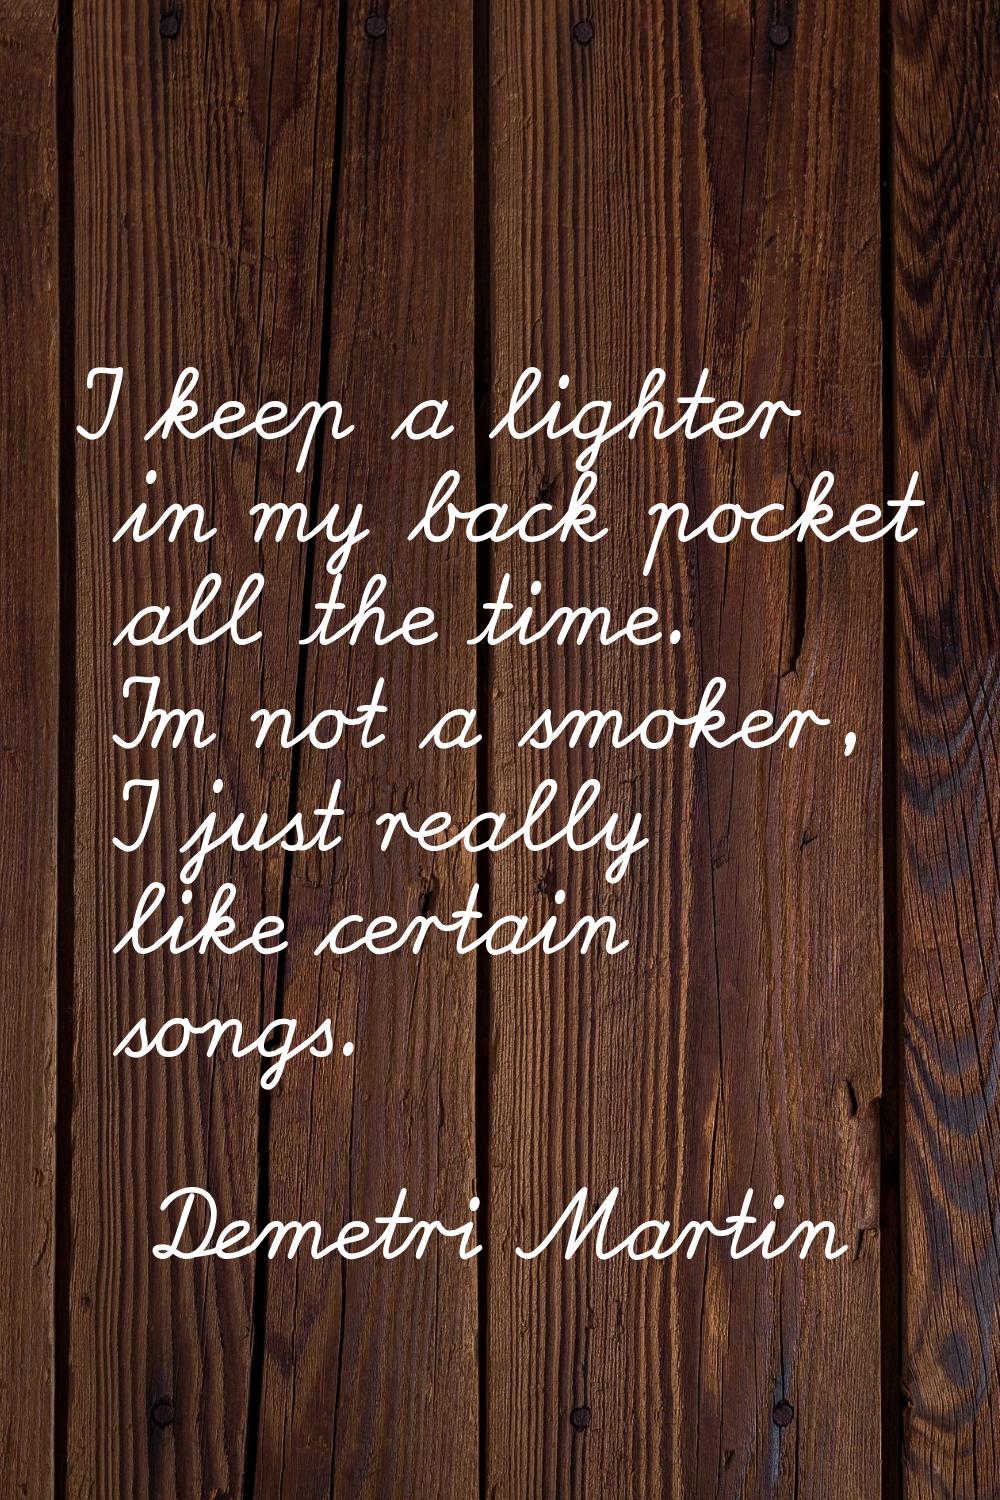 I keep a lighter in my back pocket all the time. I'm not a smoker, I just really like certain songs